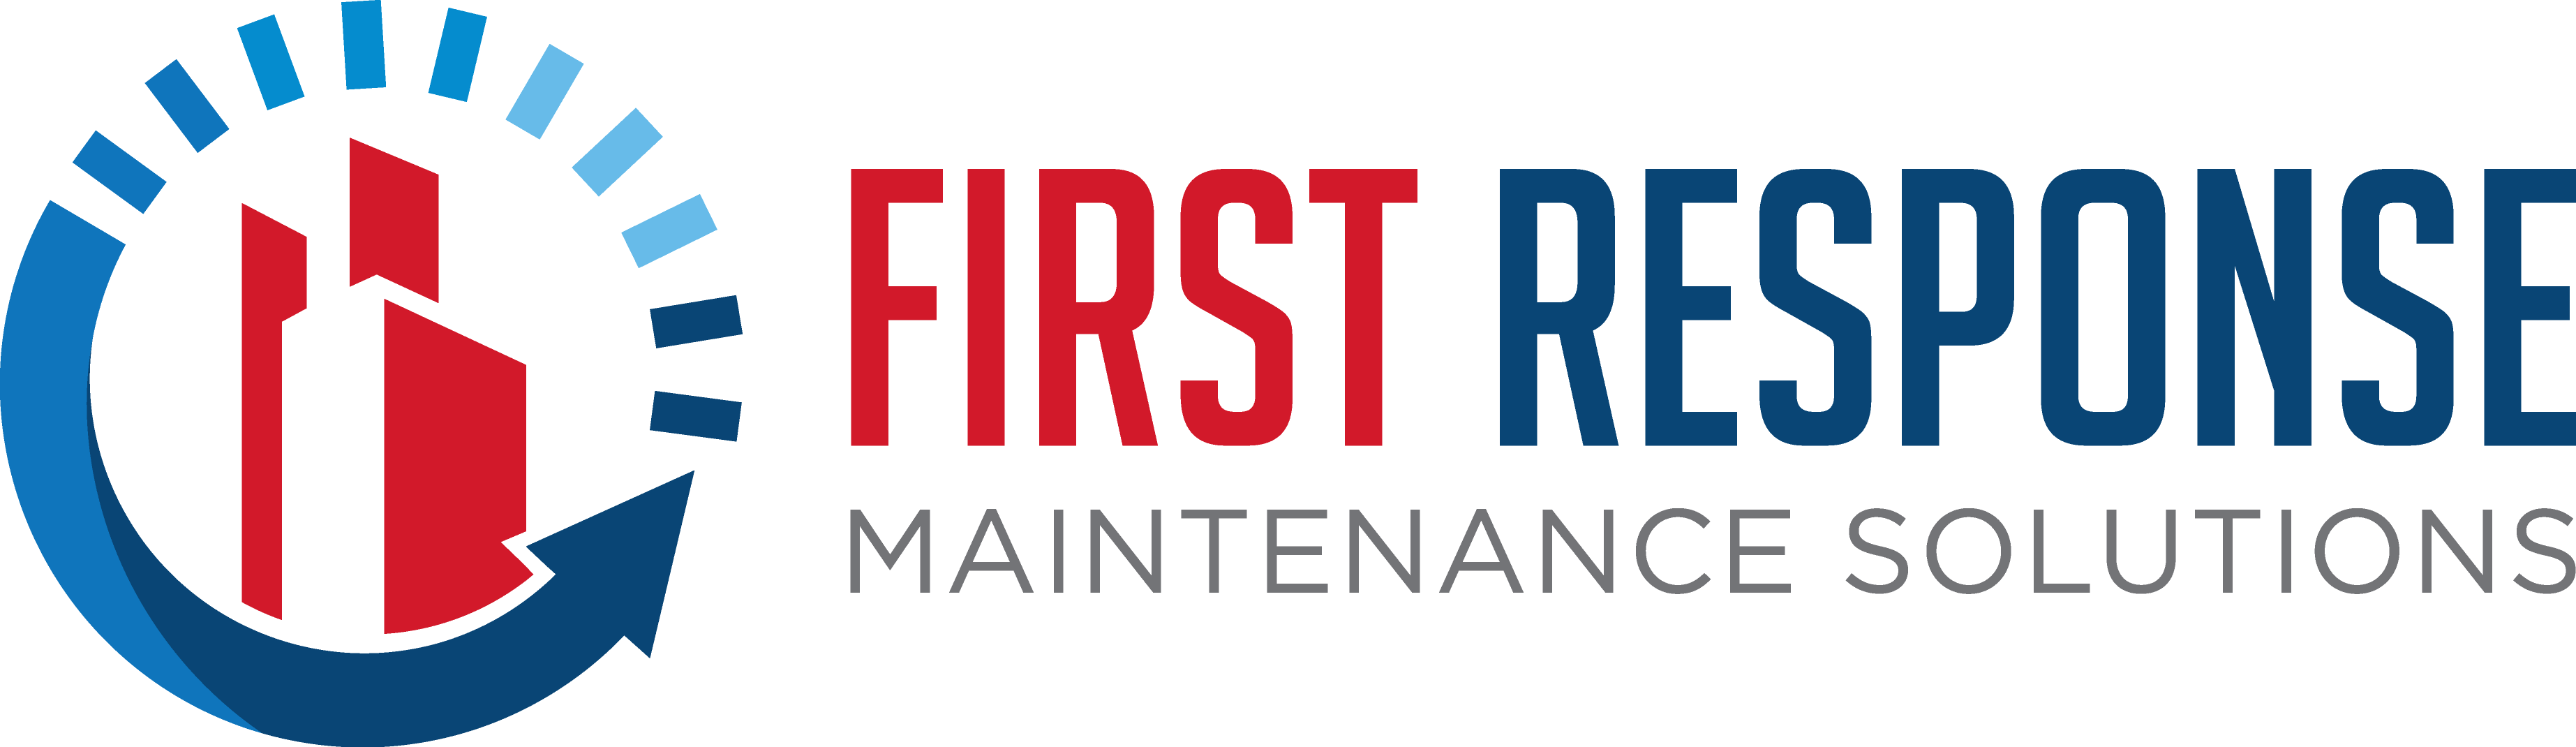 First Response Maintenance Solutions Smart Strata Body Corporate